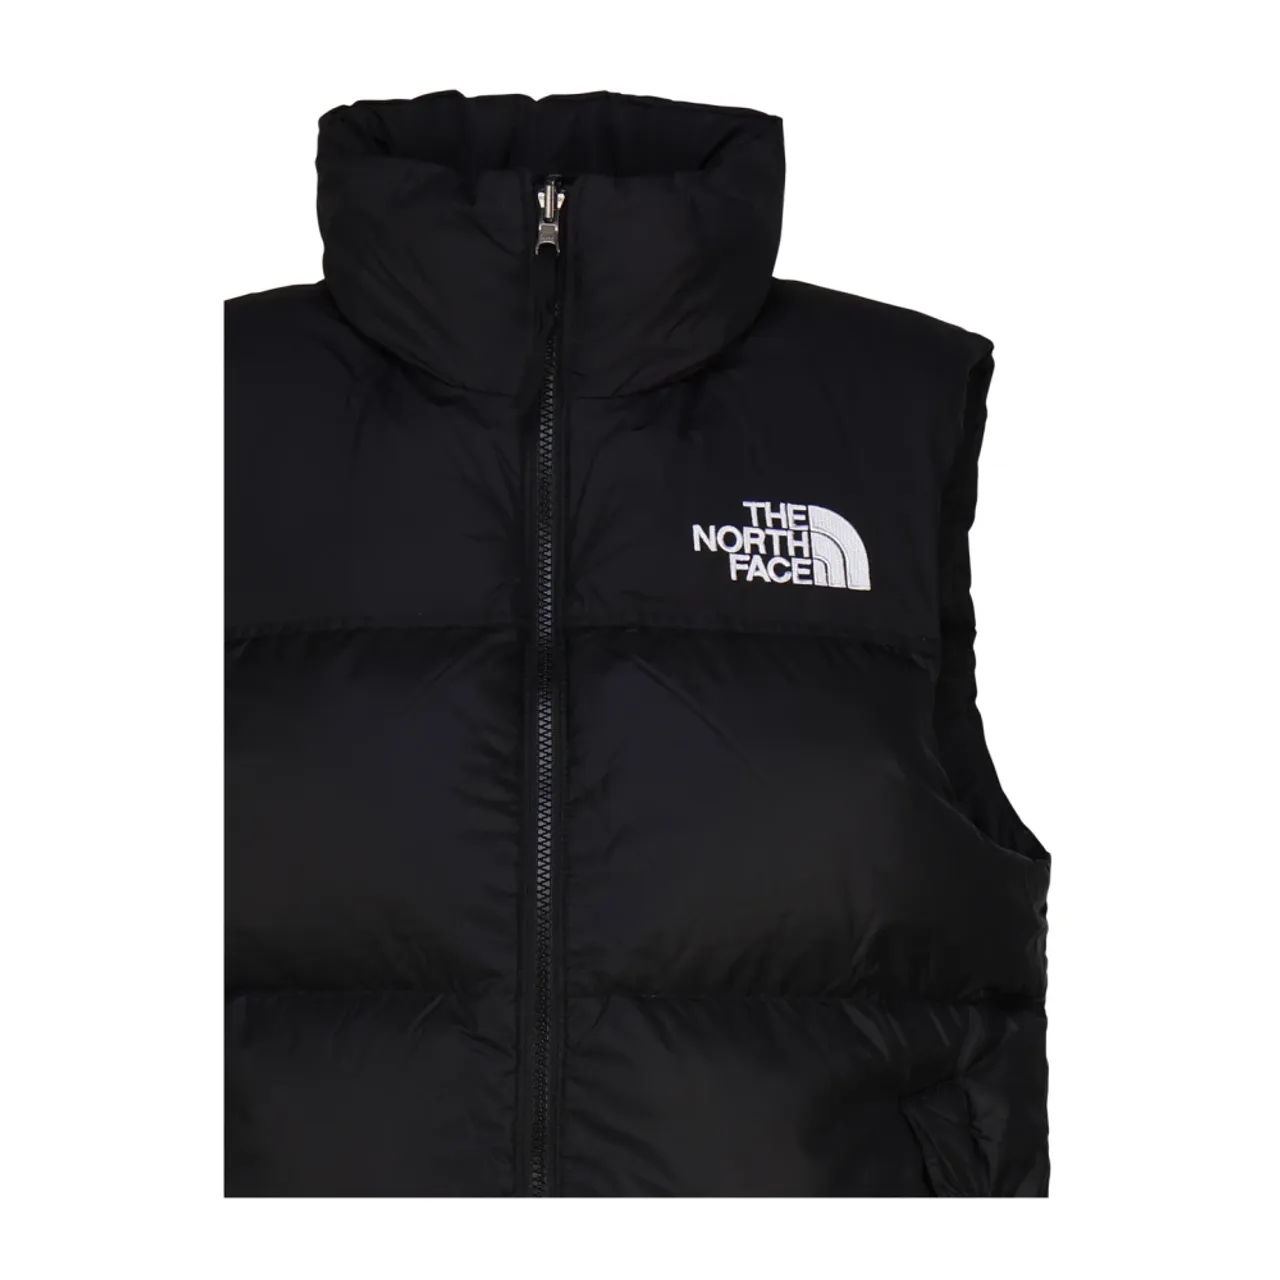 The North Face , Black Nylon Zip Jacket with Hood ,Black male, Sizes: